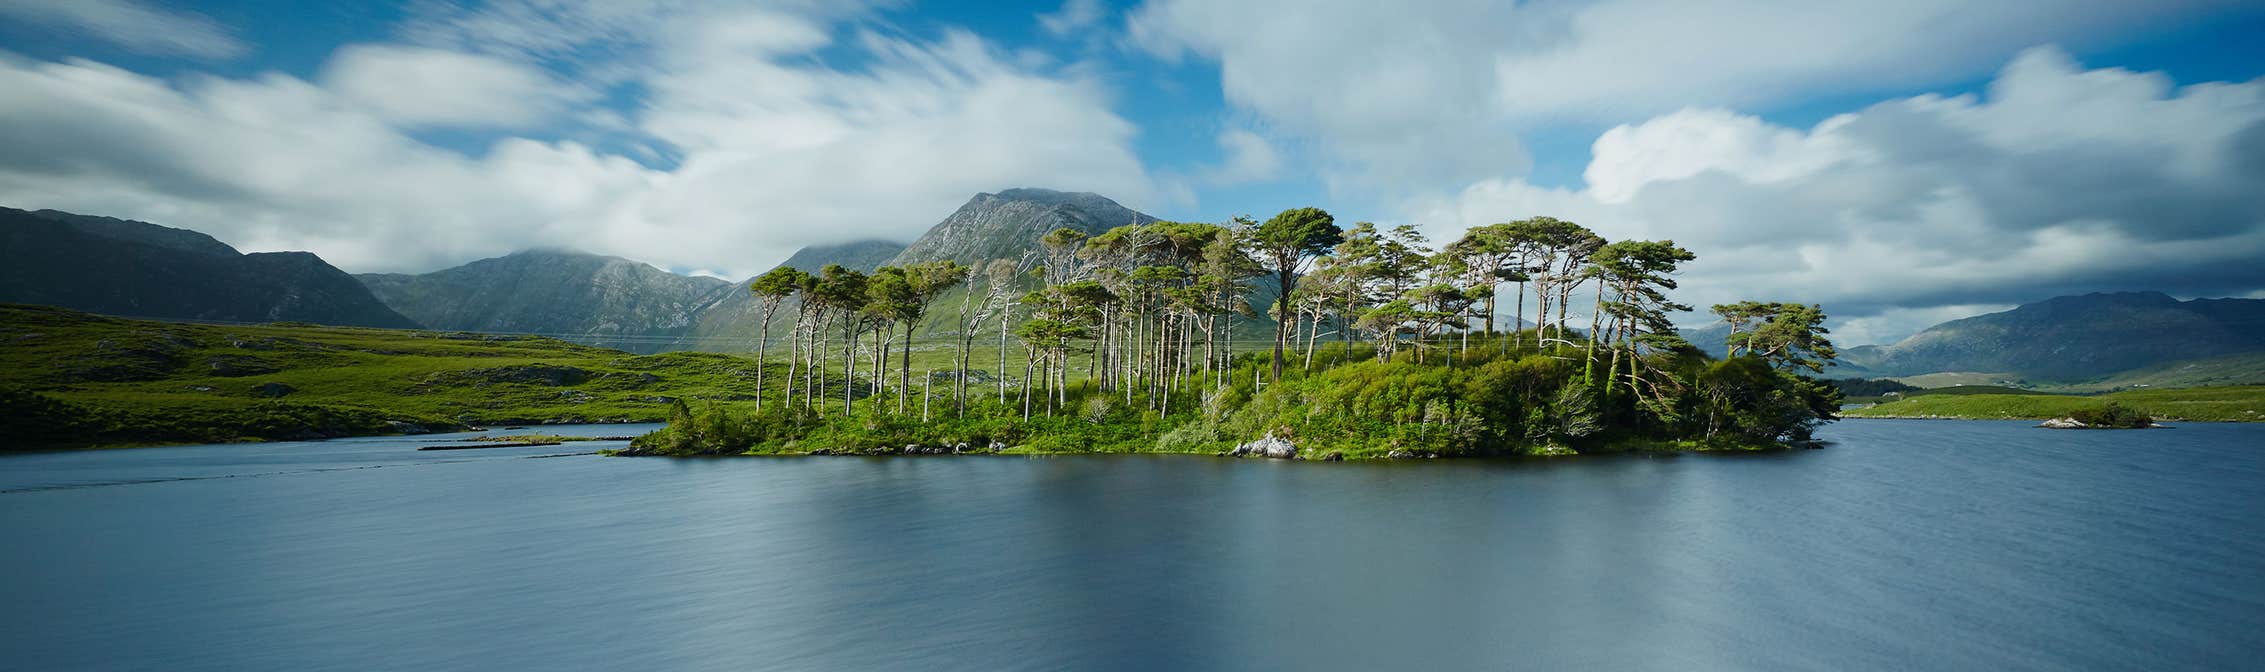 Landscape at Connemara, County Galway